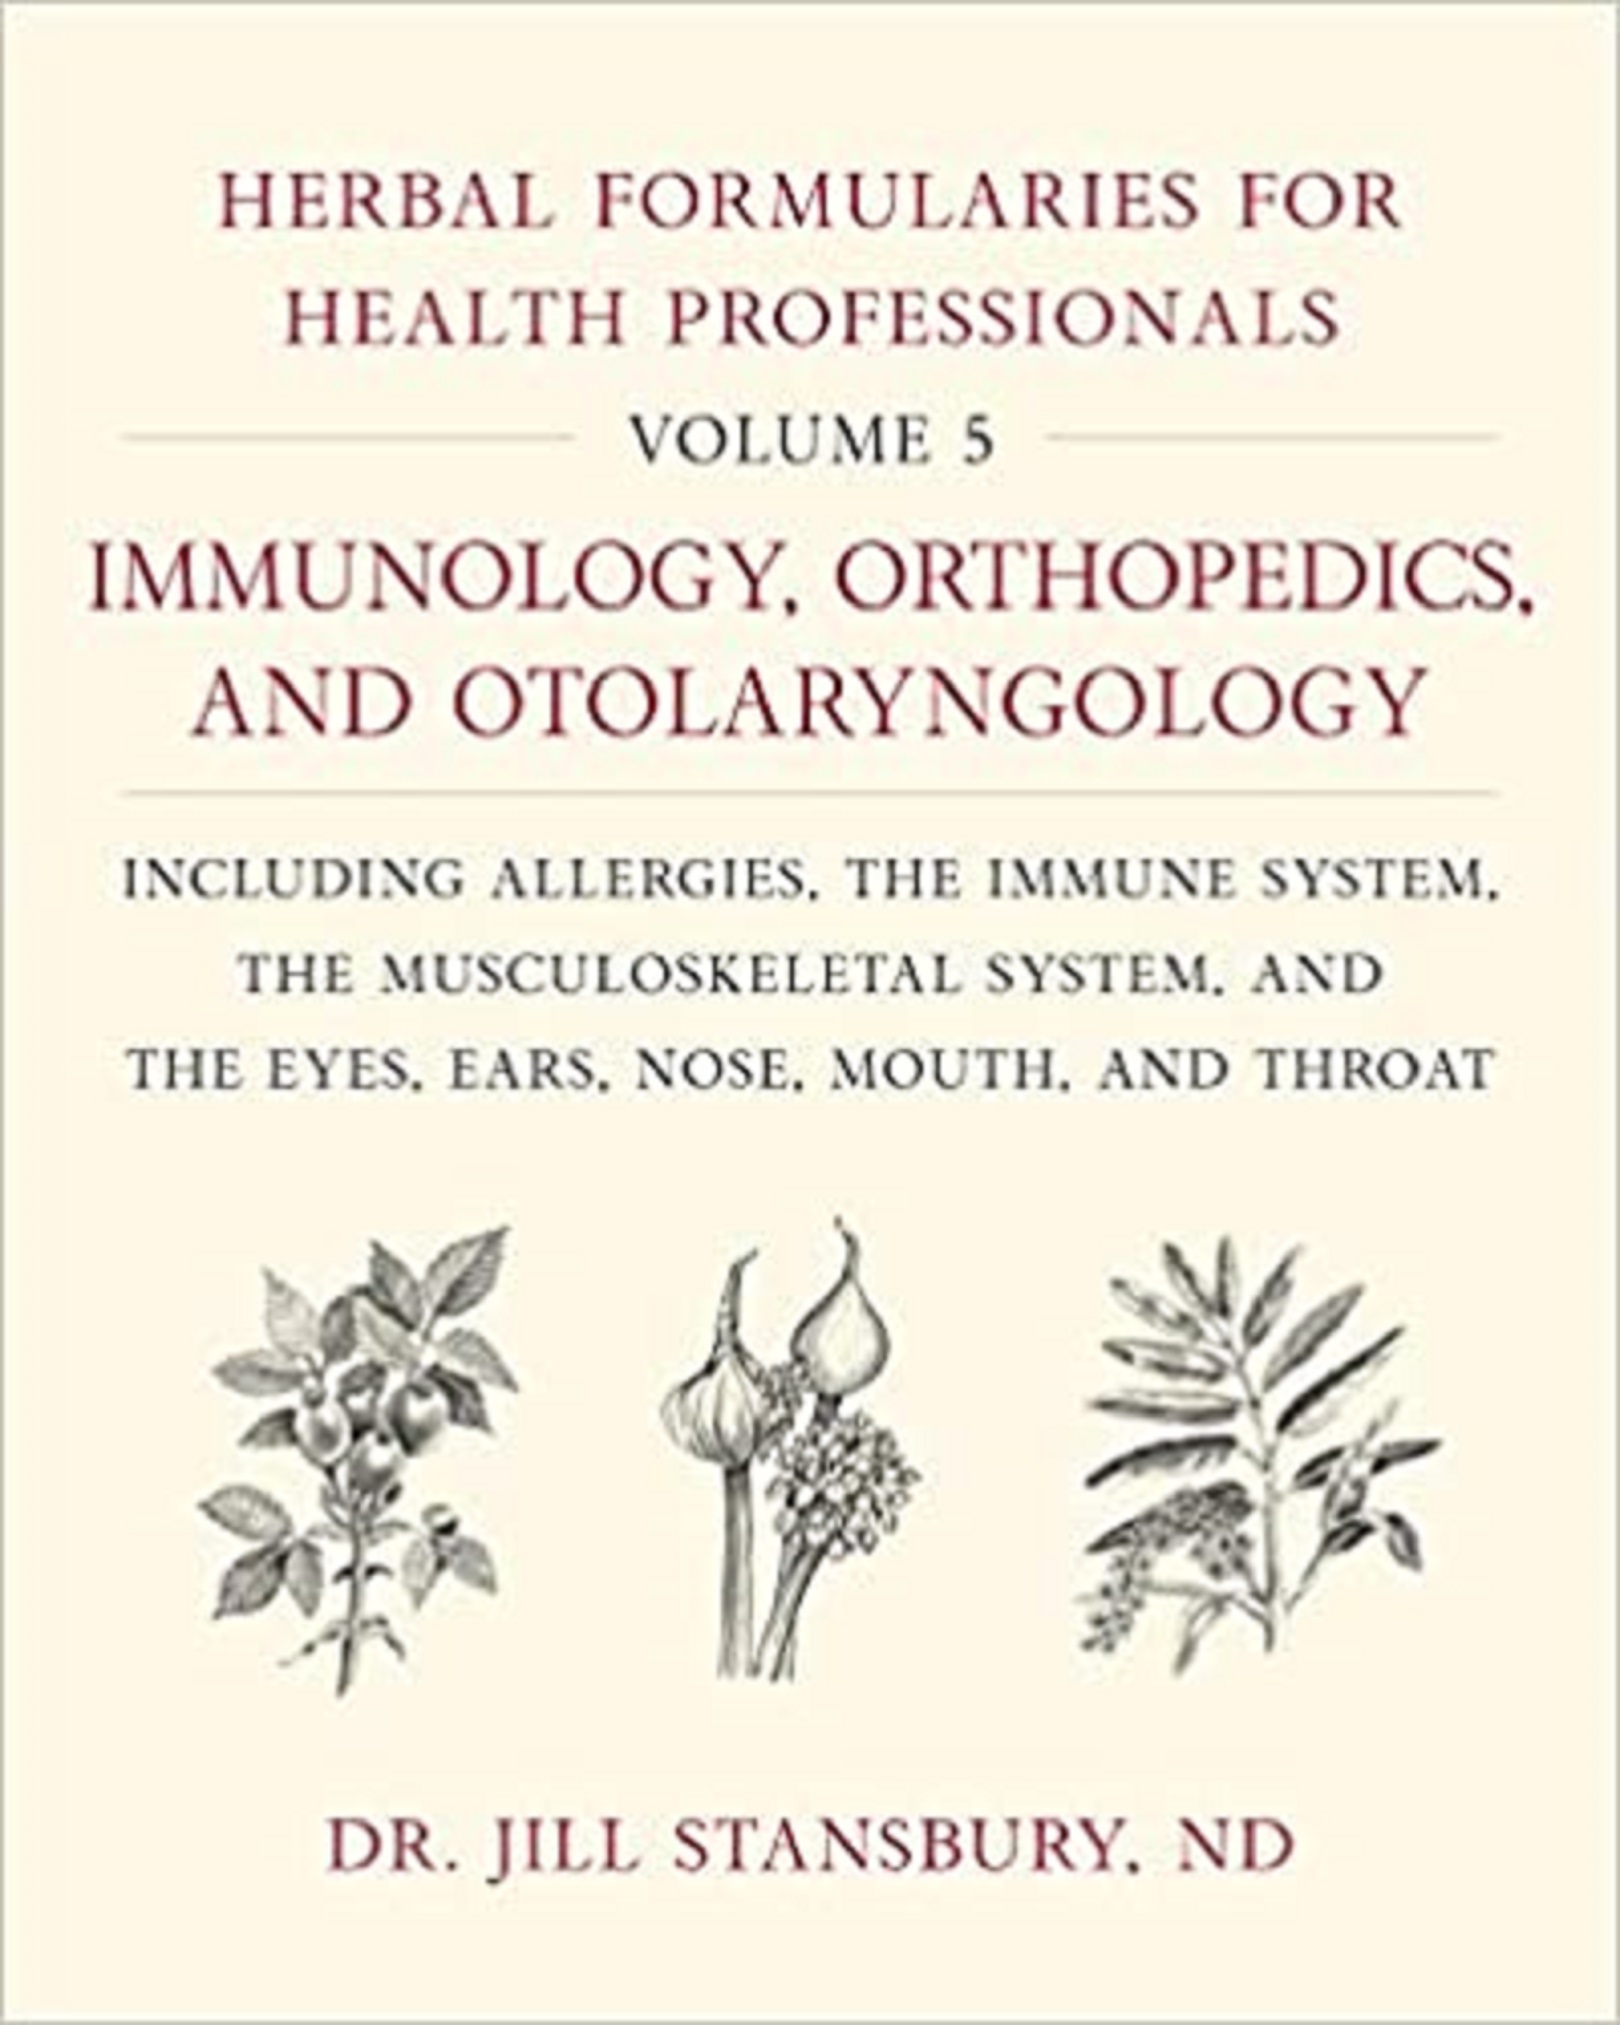 Herbal Formularies for Health Professionals - Volume 5